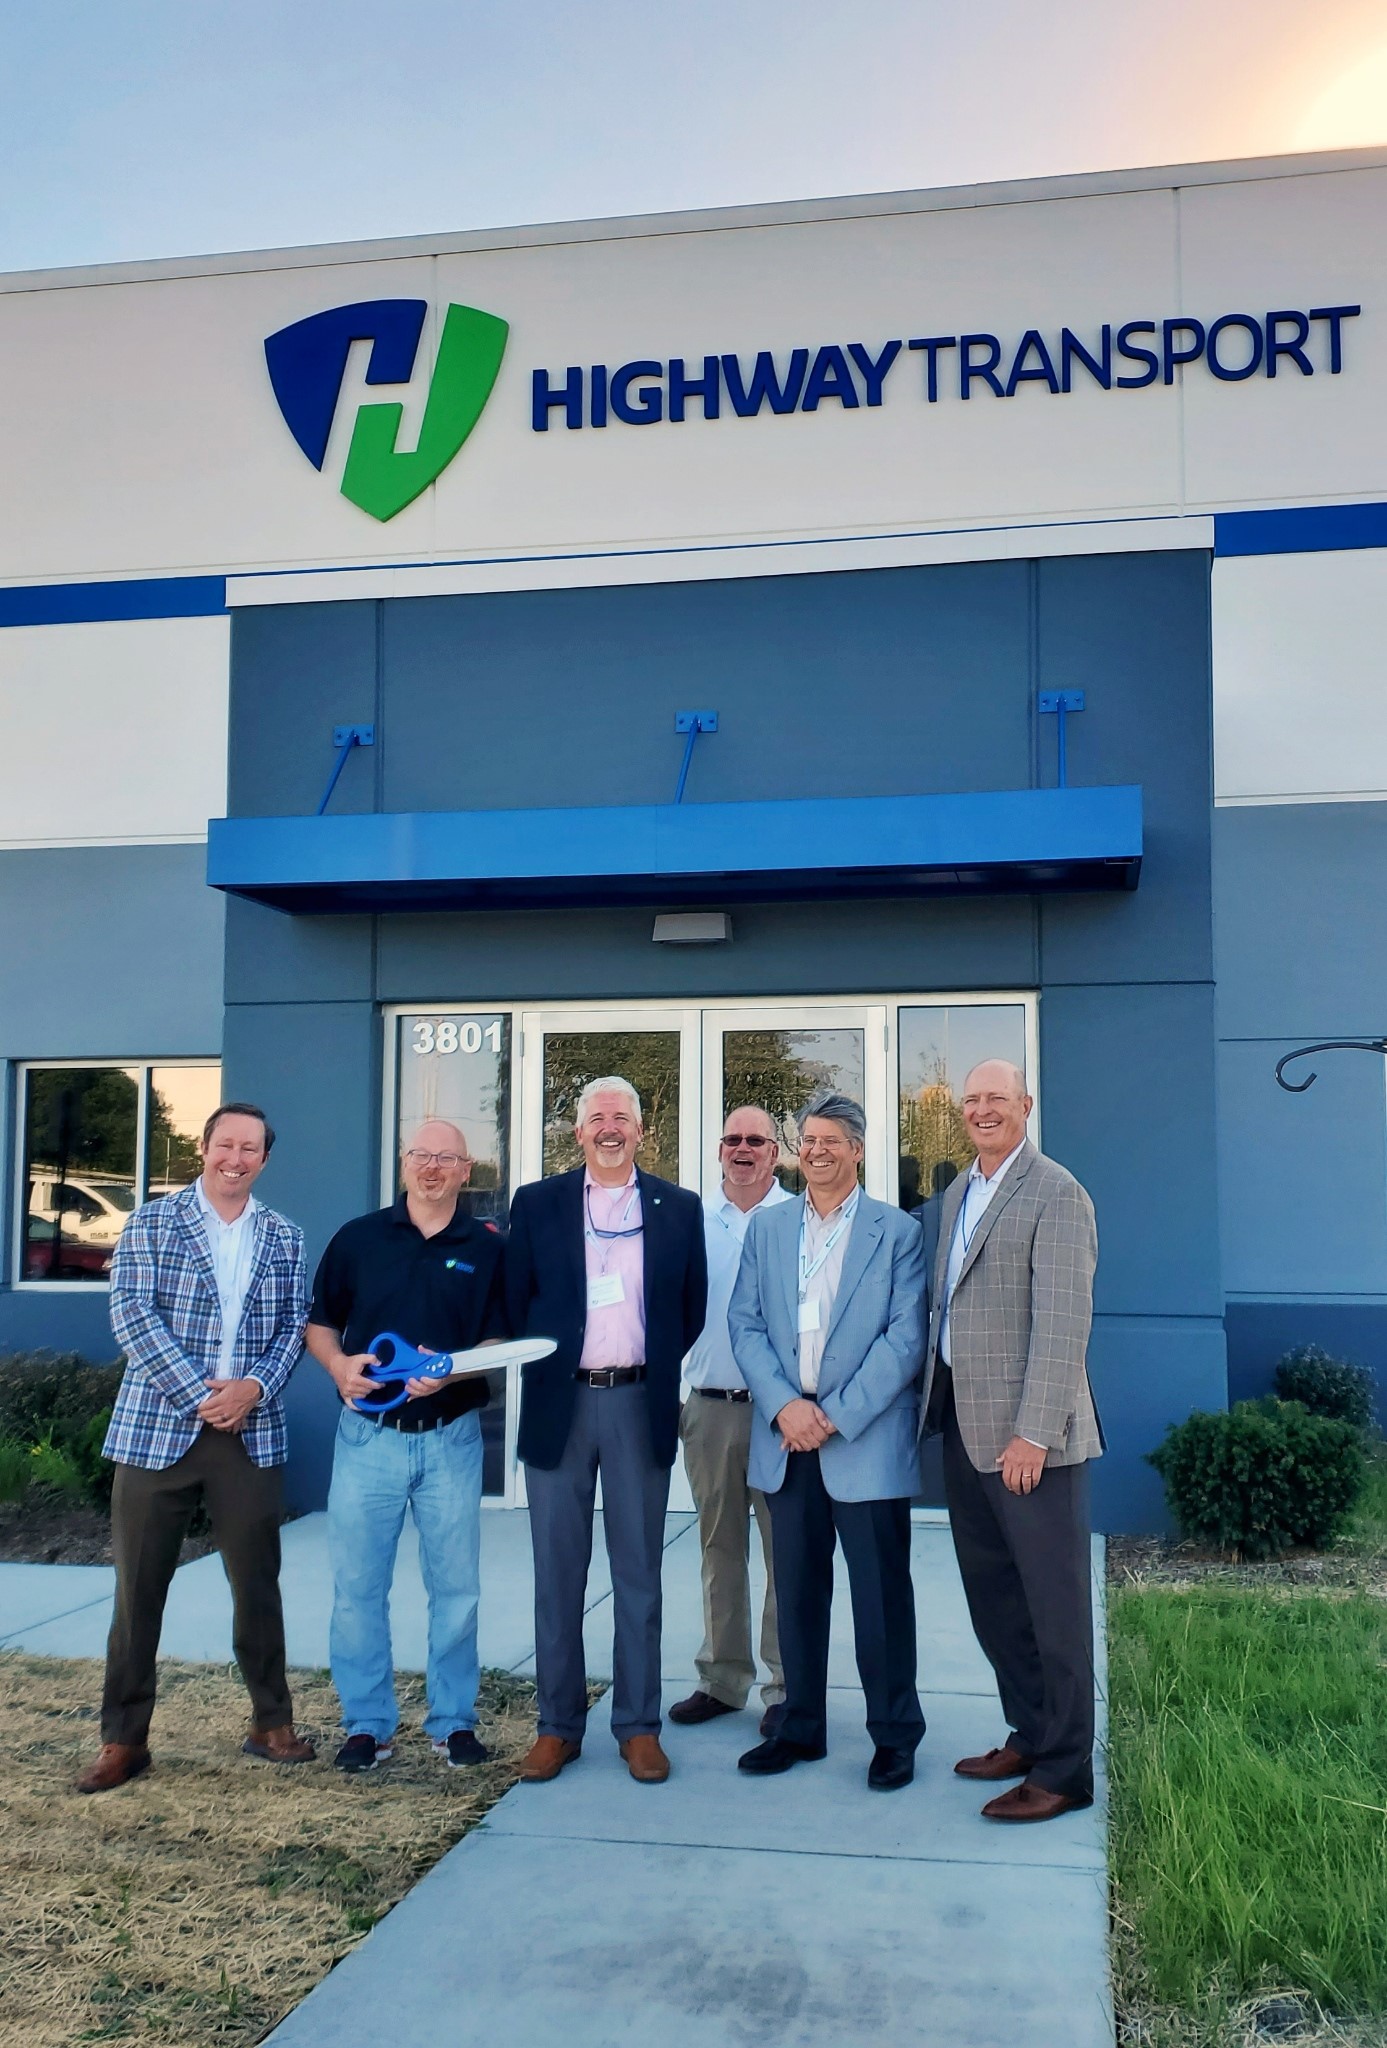 Featured image for “Highway Transport opens $11 million service center as enhanced Midwest hub serving customers across U.S. and Canada”